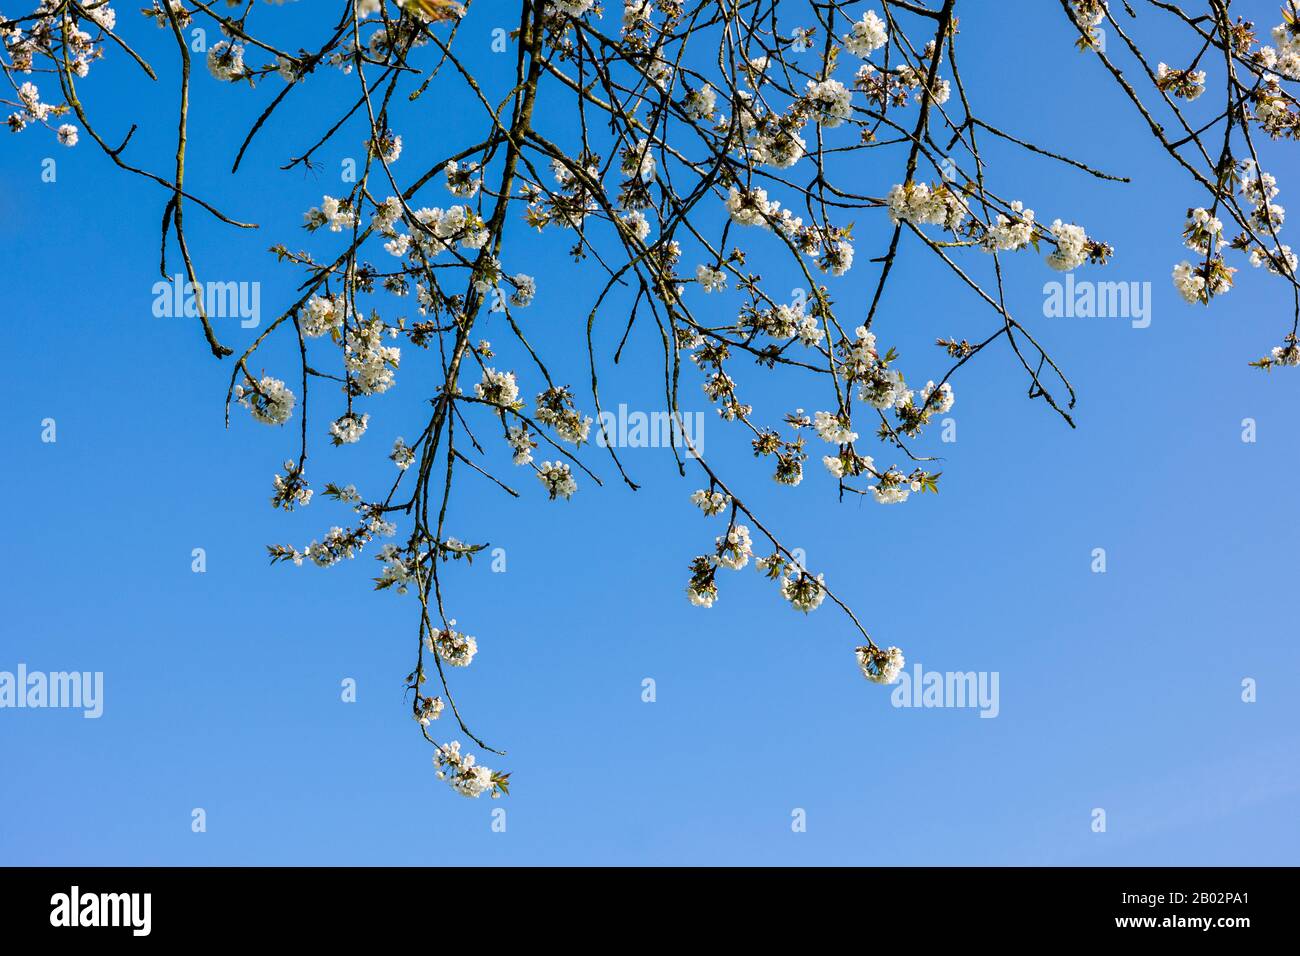 Delicate clusters of small white flowers herald the arrival of Spring according to this Prunus avium tree at nearly fifty years of age in an English g Stock Photo